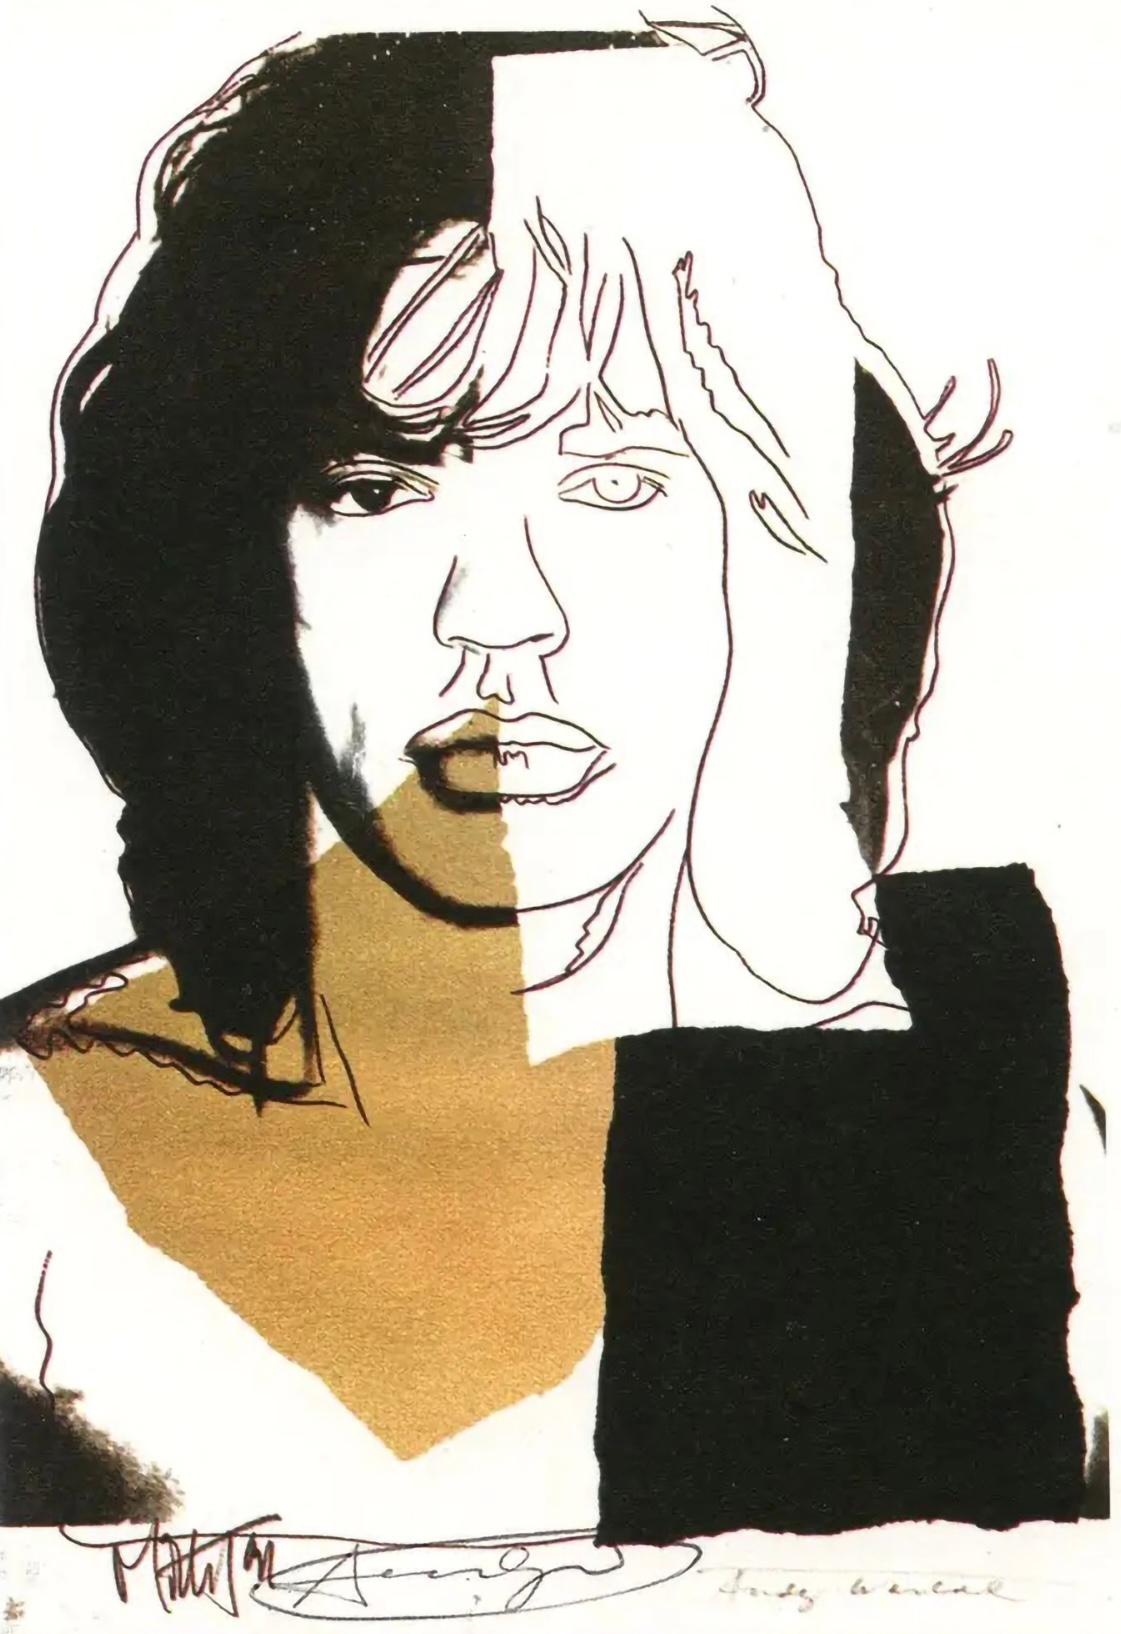 Andy Warhol Mick Jagger Leo Castelli gallery 1975:

A stunning Andy Warhol Mick Jagger announcement card hand signed by Warhol in marker on the lower center (in between a Jagger & Warhol printed signature). This work was published by Castelli